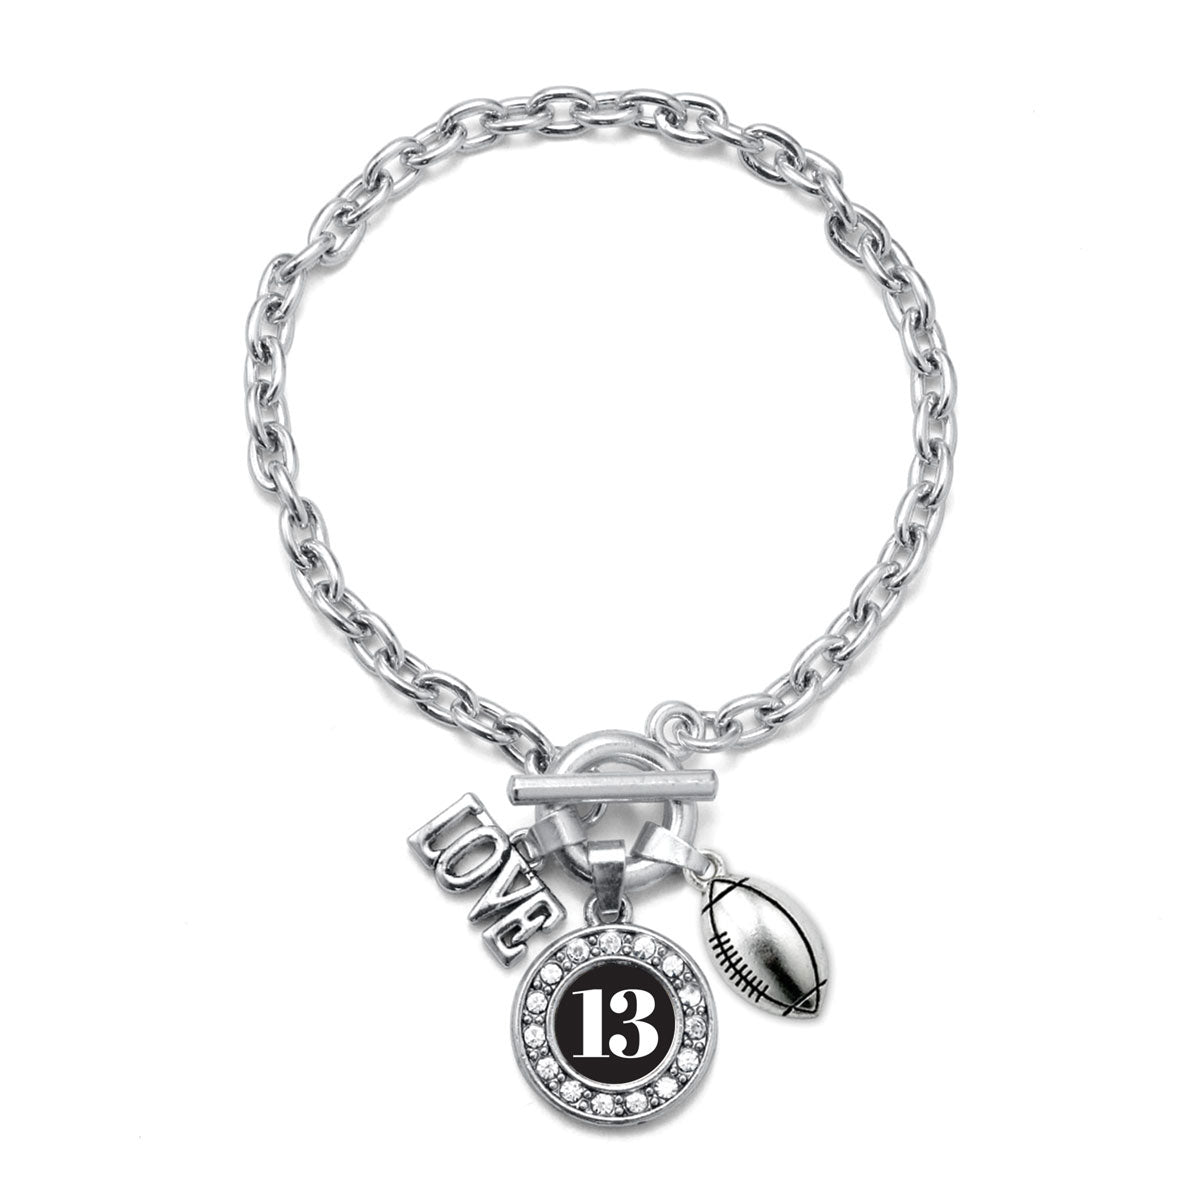 Silver Football - Sports Number 13 Circle Charm Toggle Bracelet